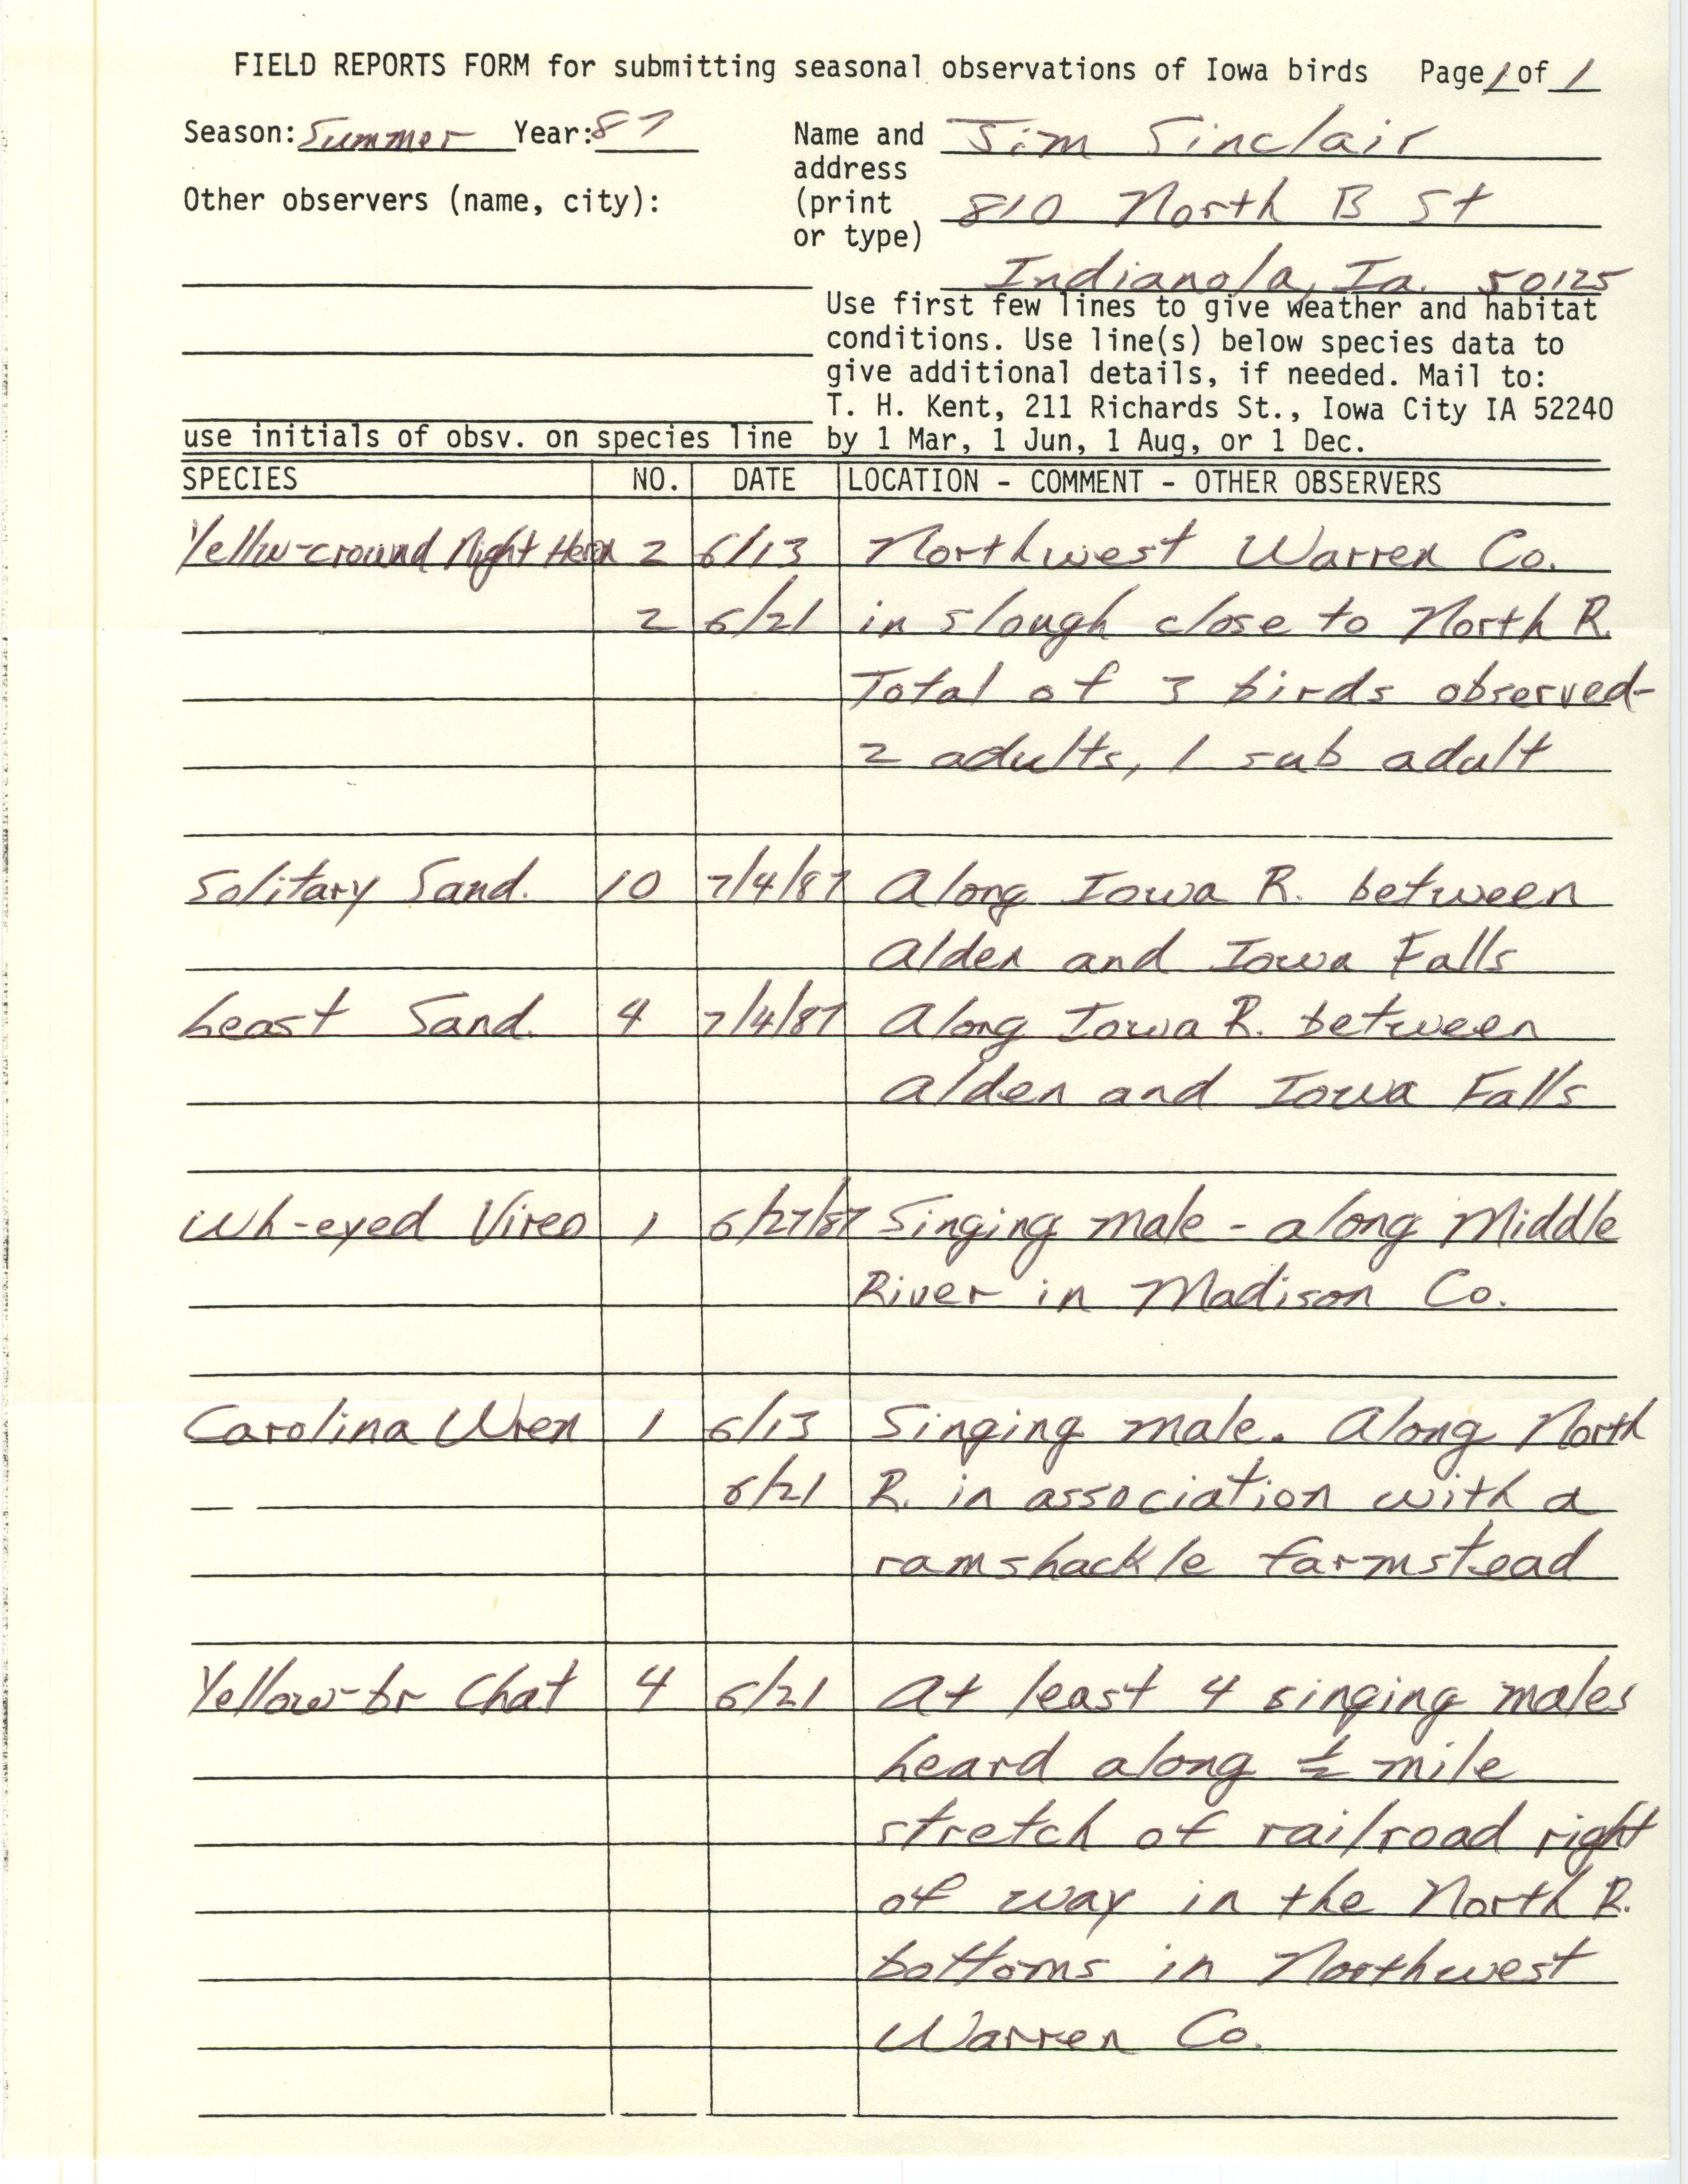 Field reports form for submitting seasonal observations of Iowa birds, Jim Sinclair, summer 1987